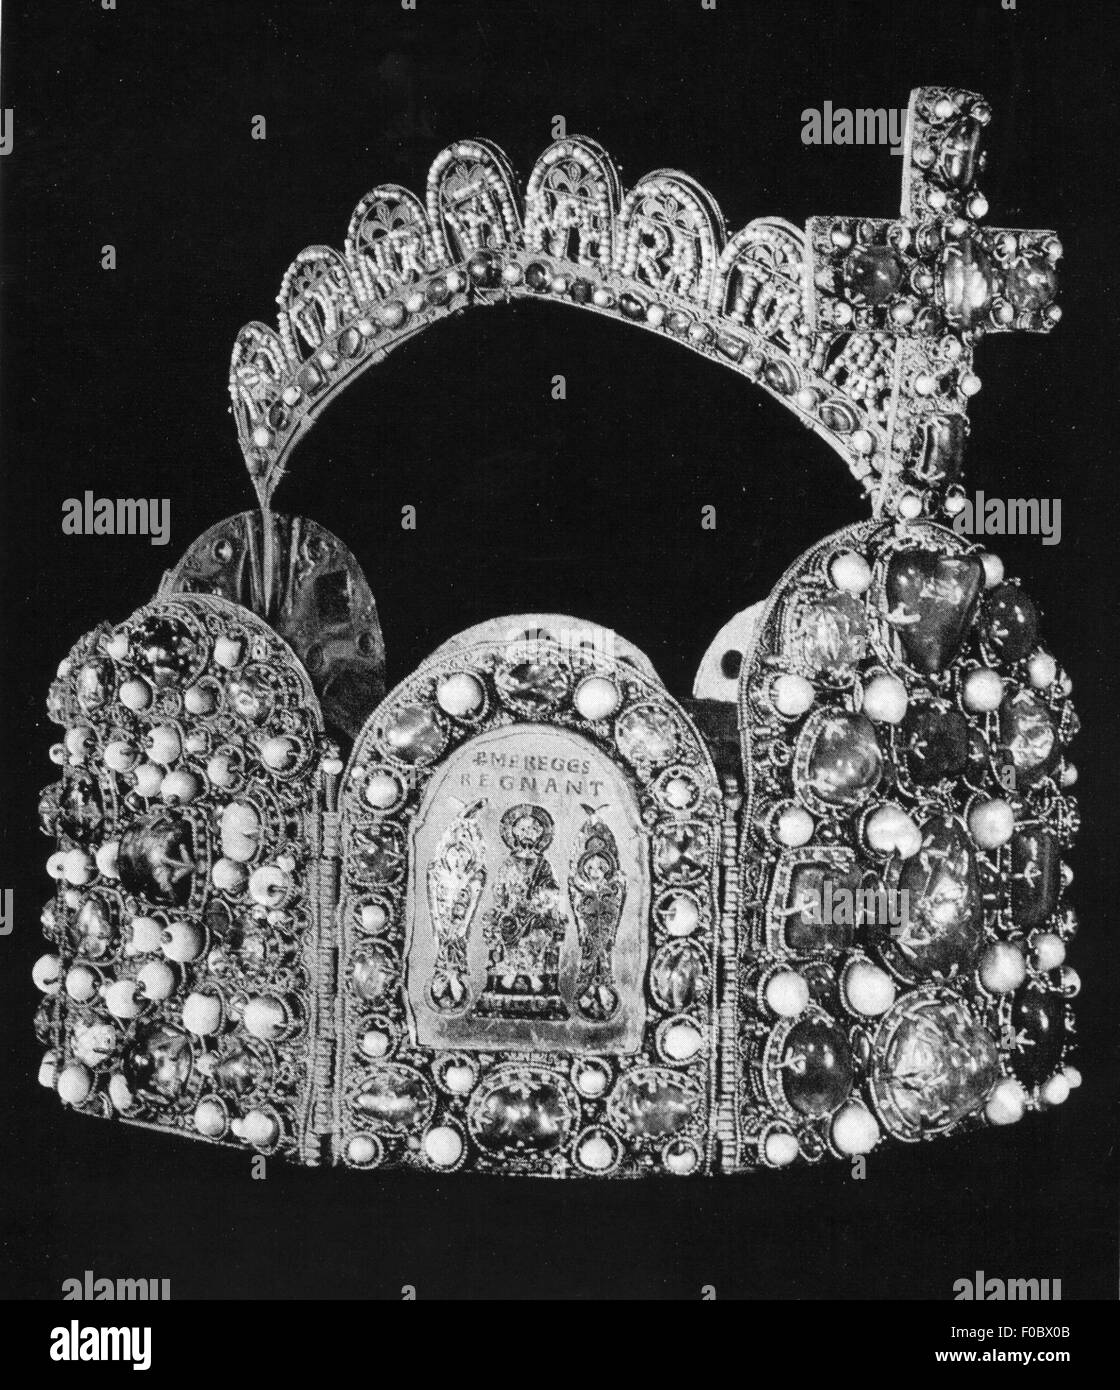 crowns / crown jewels,Holy Roman Empire,imperial crown of the kings and emperors,second half 10th century,chromolithograph,treasury,Hofburg Palace,Vienna,10th century,Middle Ages,medieval,mediaeval,Holy Roman Empire,Imperial Regalia,crown imperial,imperial crowns,hoop crown,gold,gemstone,gem,gems,gemstones,precious stone,precious stones,jewel,jewels,jewellery,jeweled,jeweling,enamel,cross,crosses,religion,religions,Christianity,Jesus Christ,reign,symbol,symbols,crown,crowns,king,kings,emperor,emperors,historic,histo,Additional-Rights-Clearences-Not Available Stock Photo